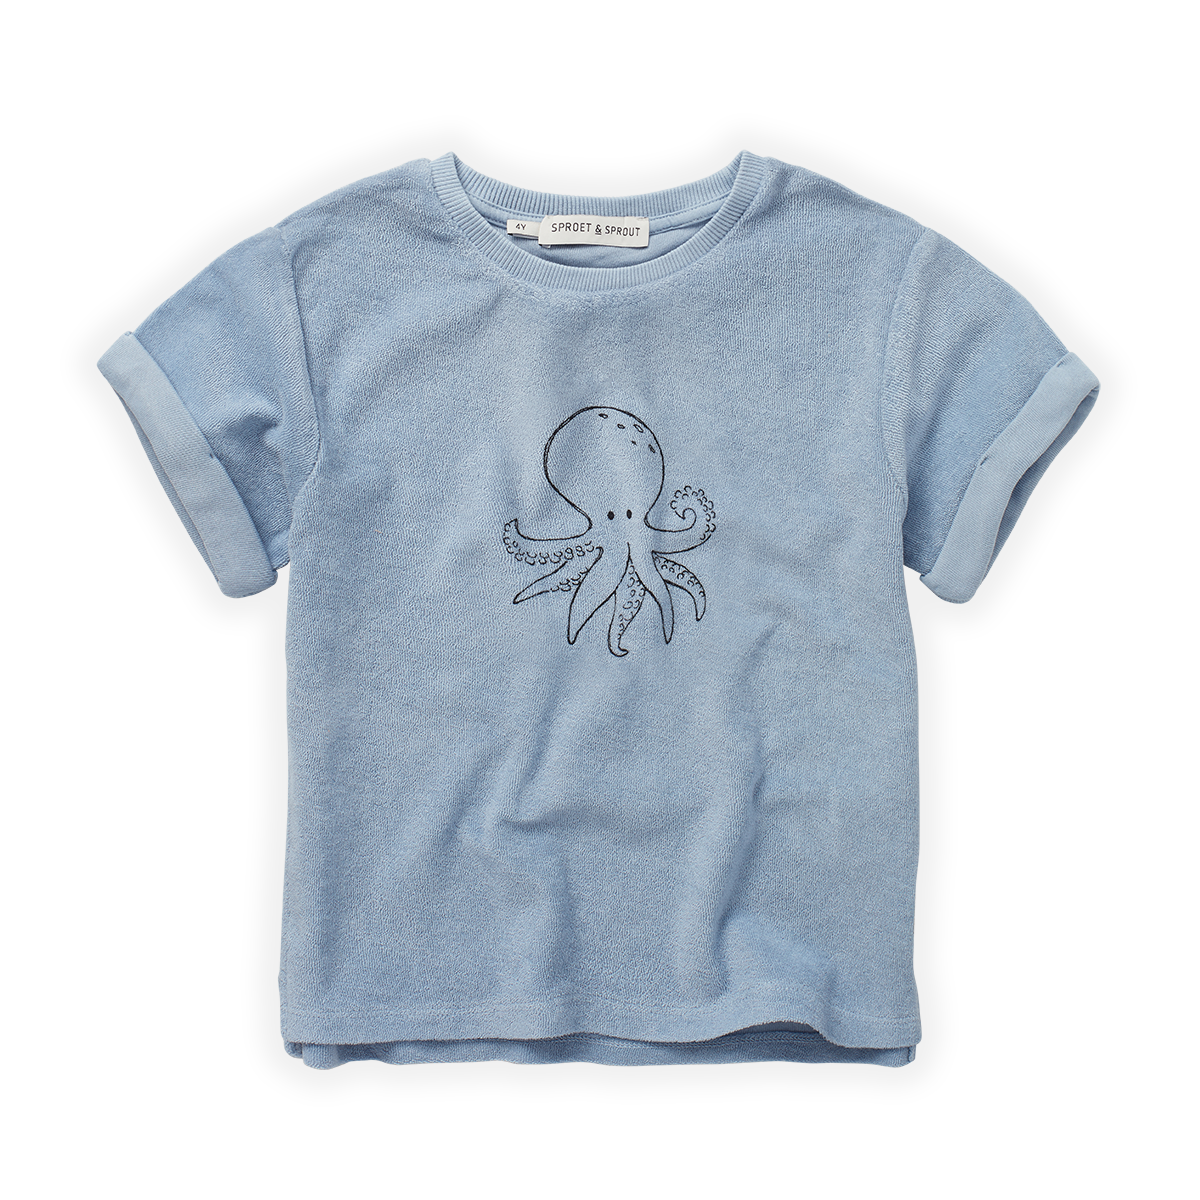 Sproet & Sprout Terry T-Shirt octopus S23-551 Petite Tortue